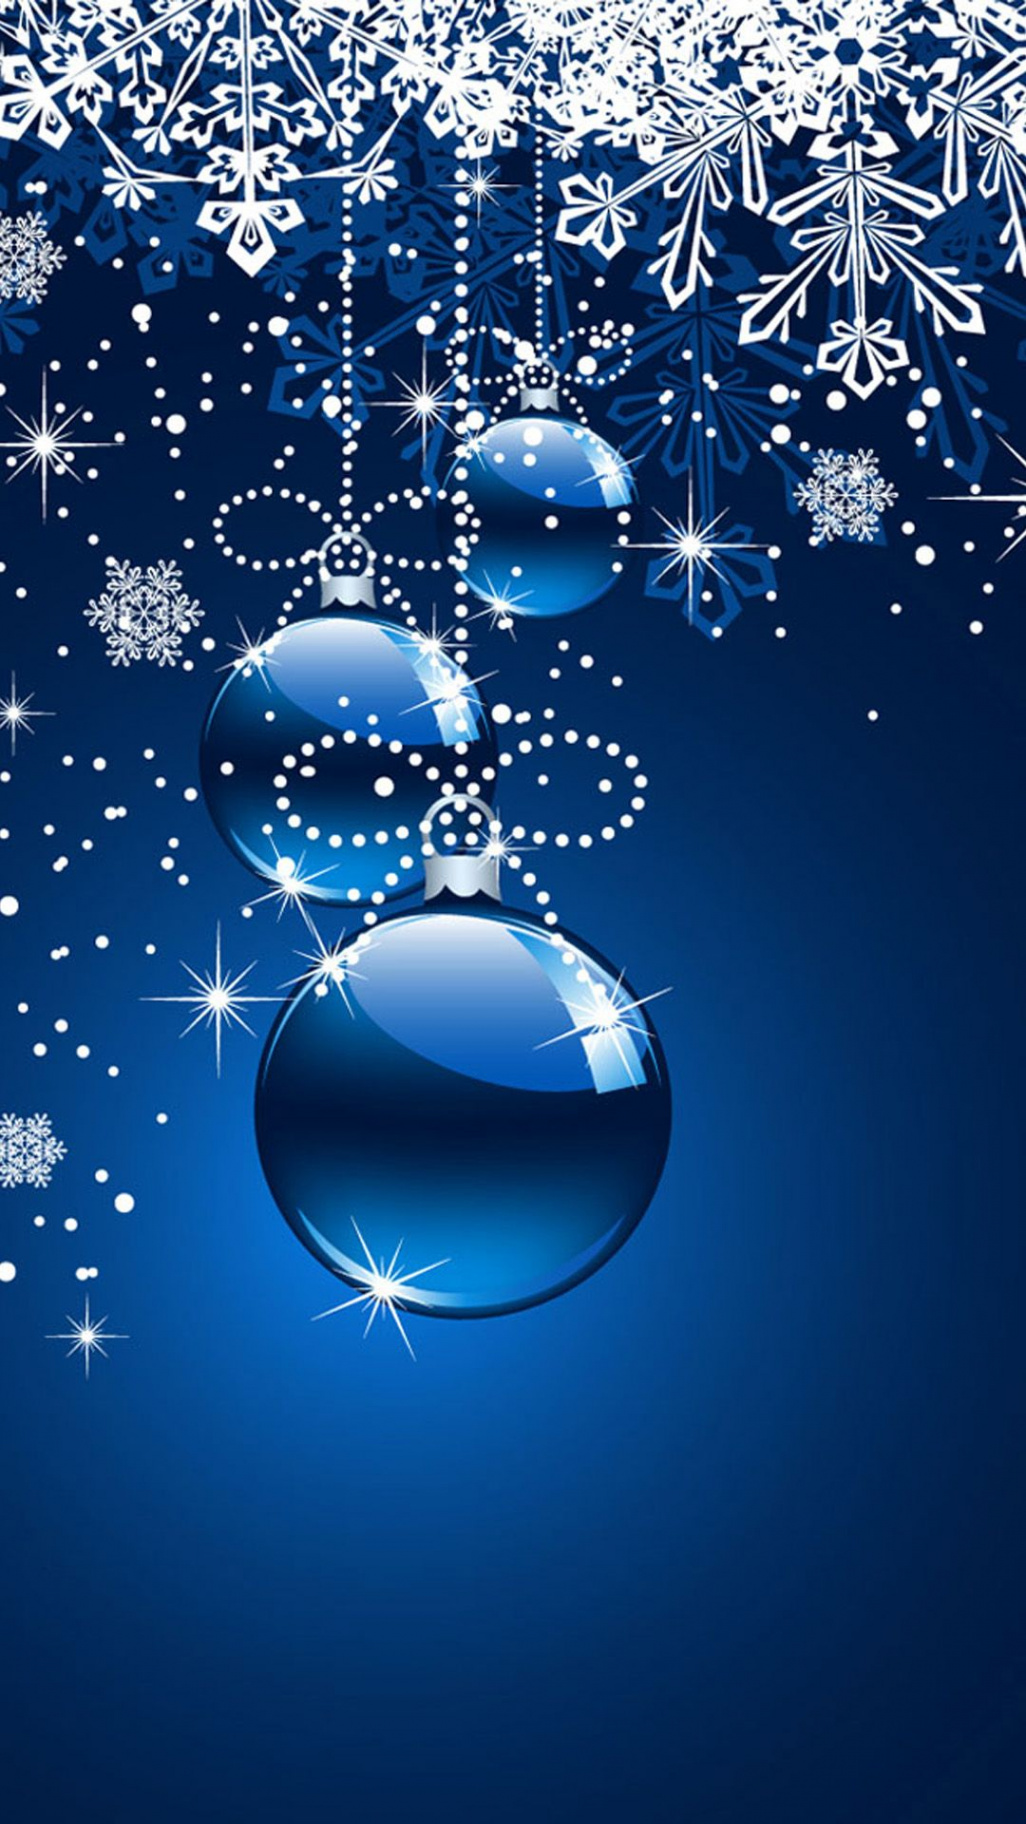 blue holiday wallpaper - Google Search  Merry christmas wallpaper